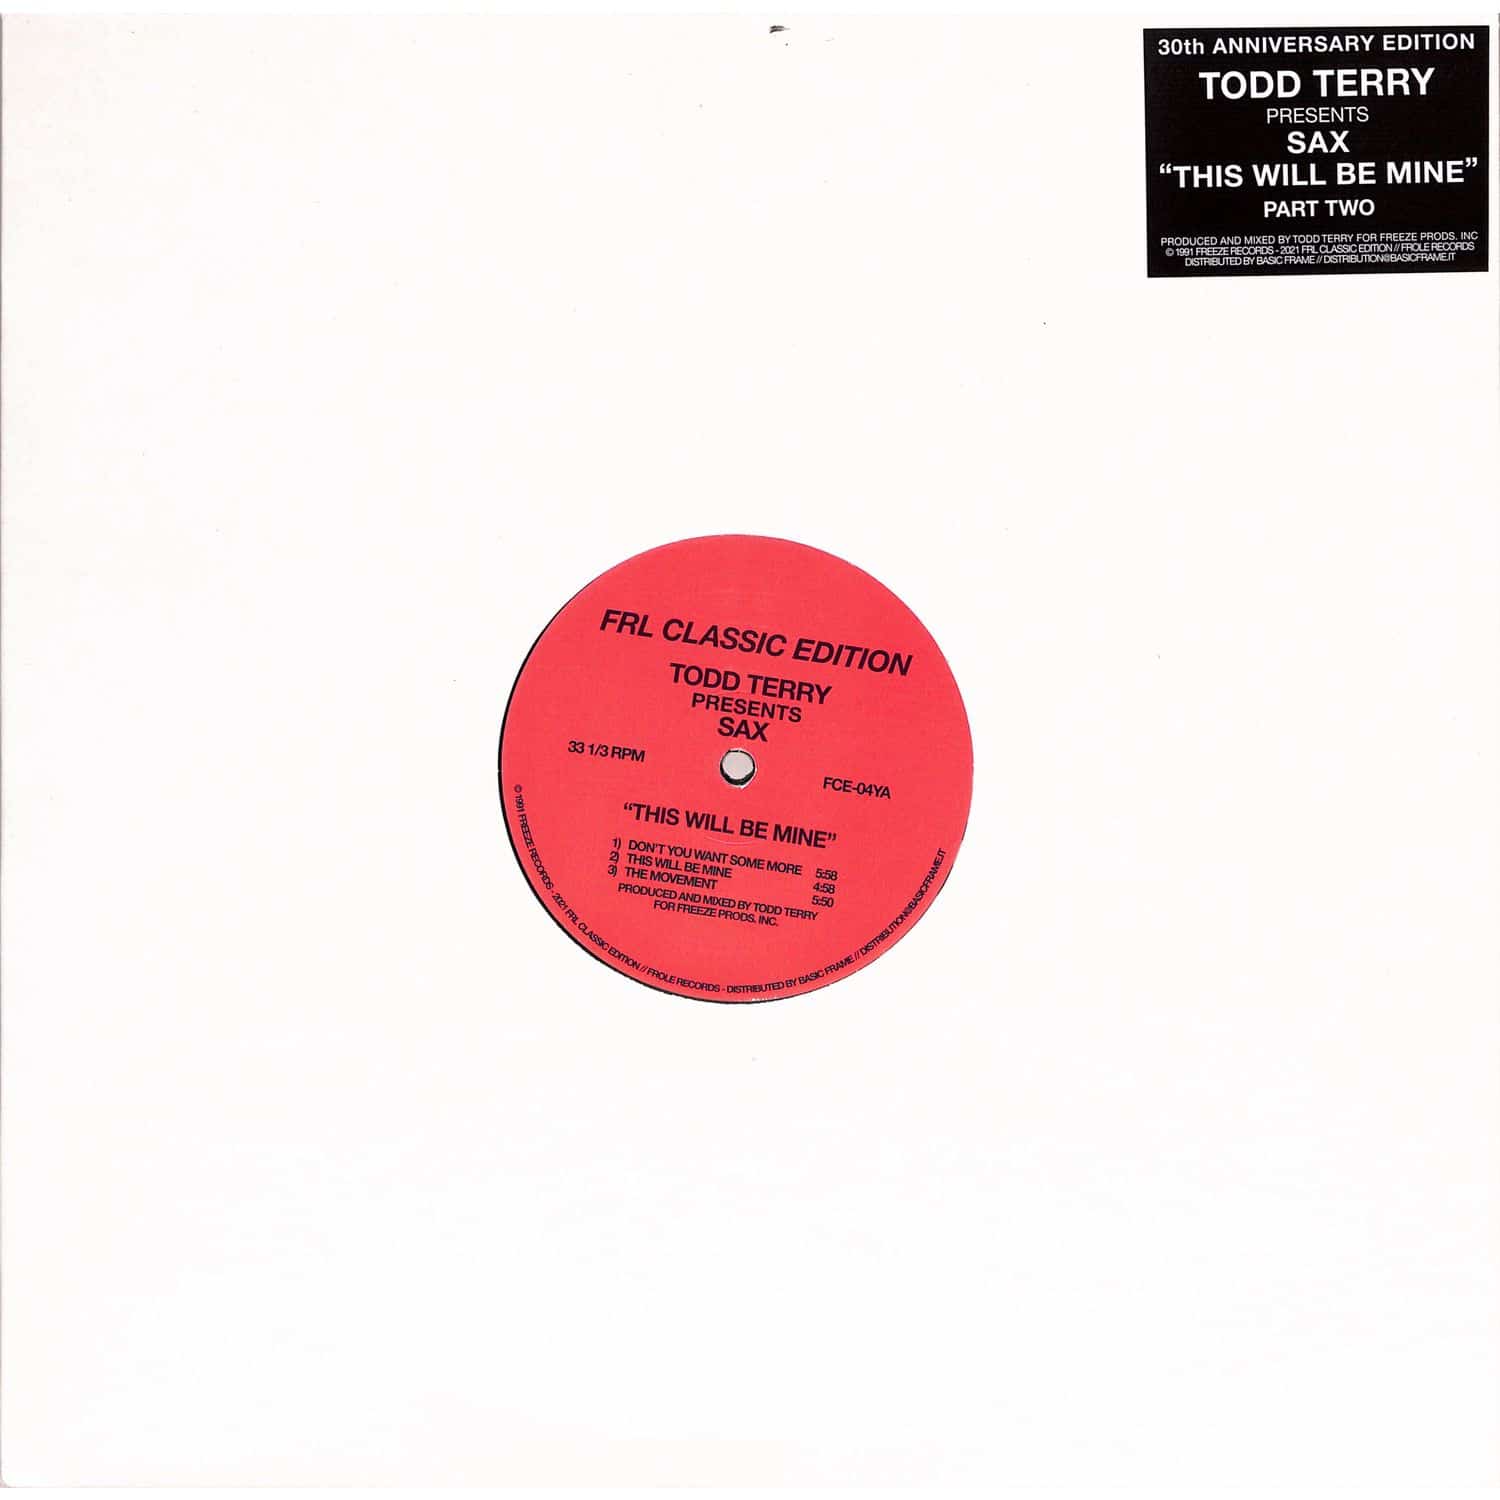 Todd Terry Presents Sax - THIS WILL BE MINE PT. 2 